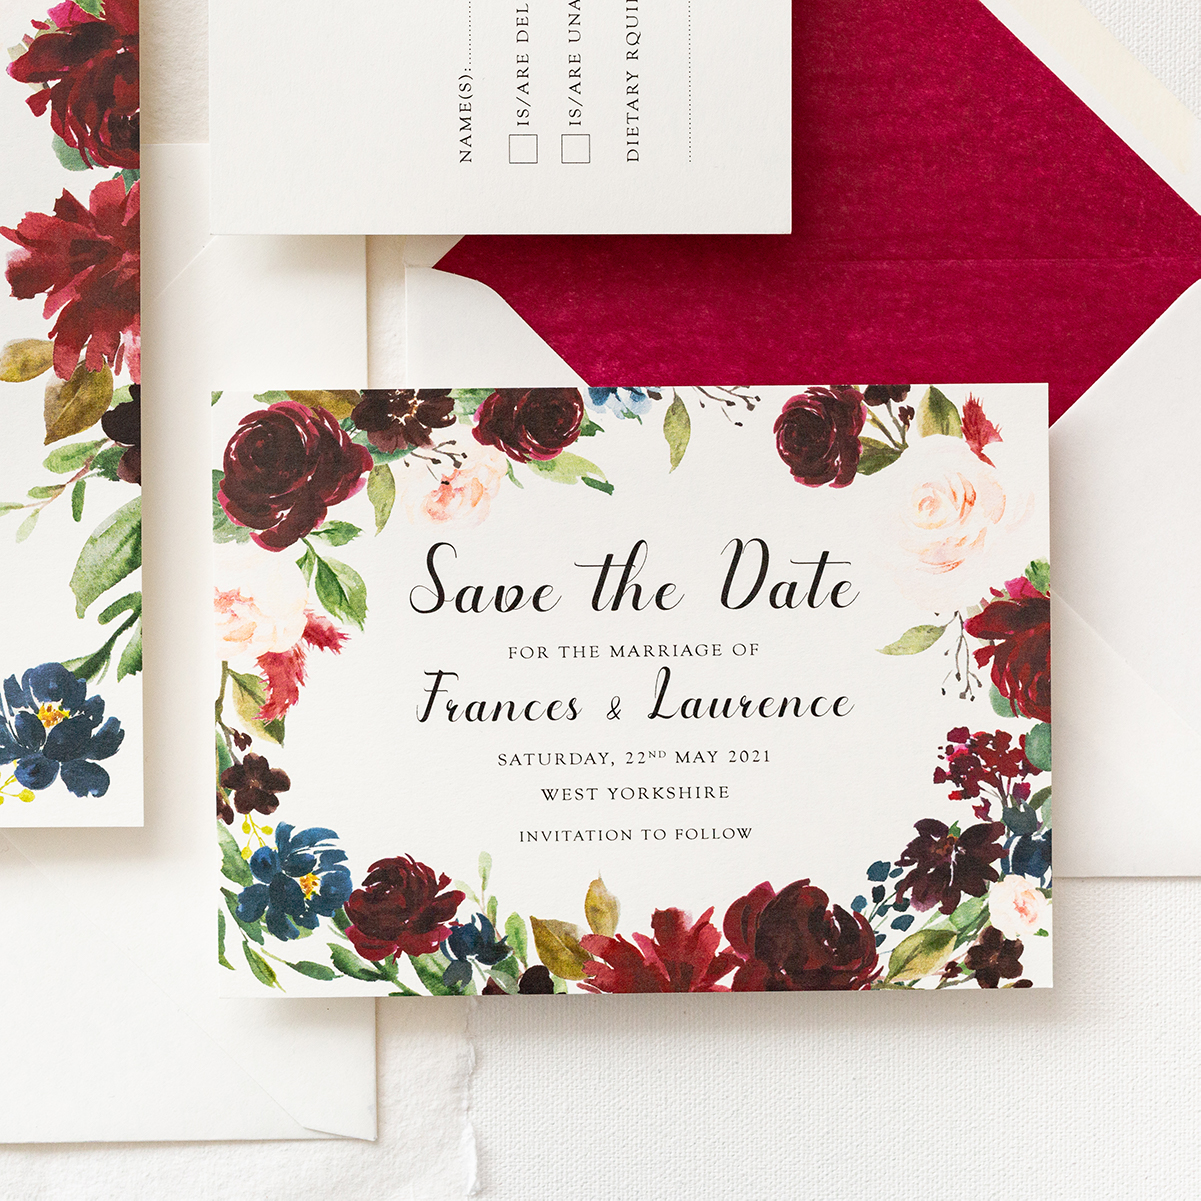 Frances Save the Date